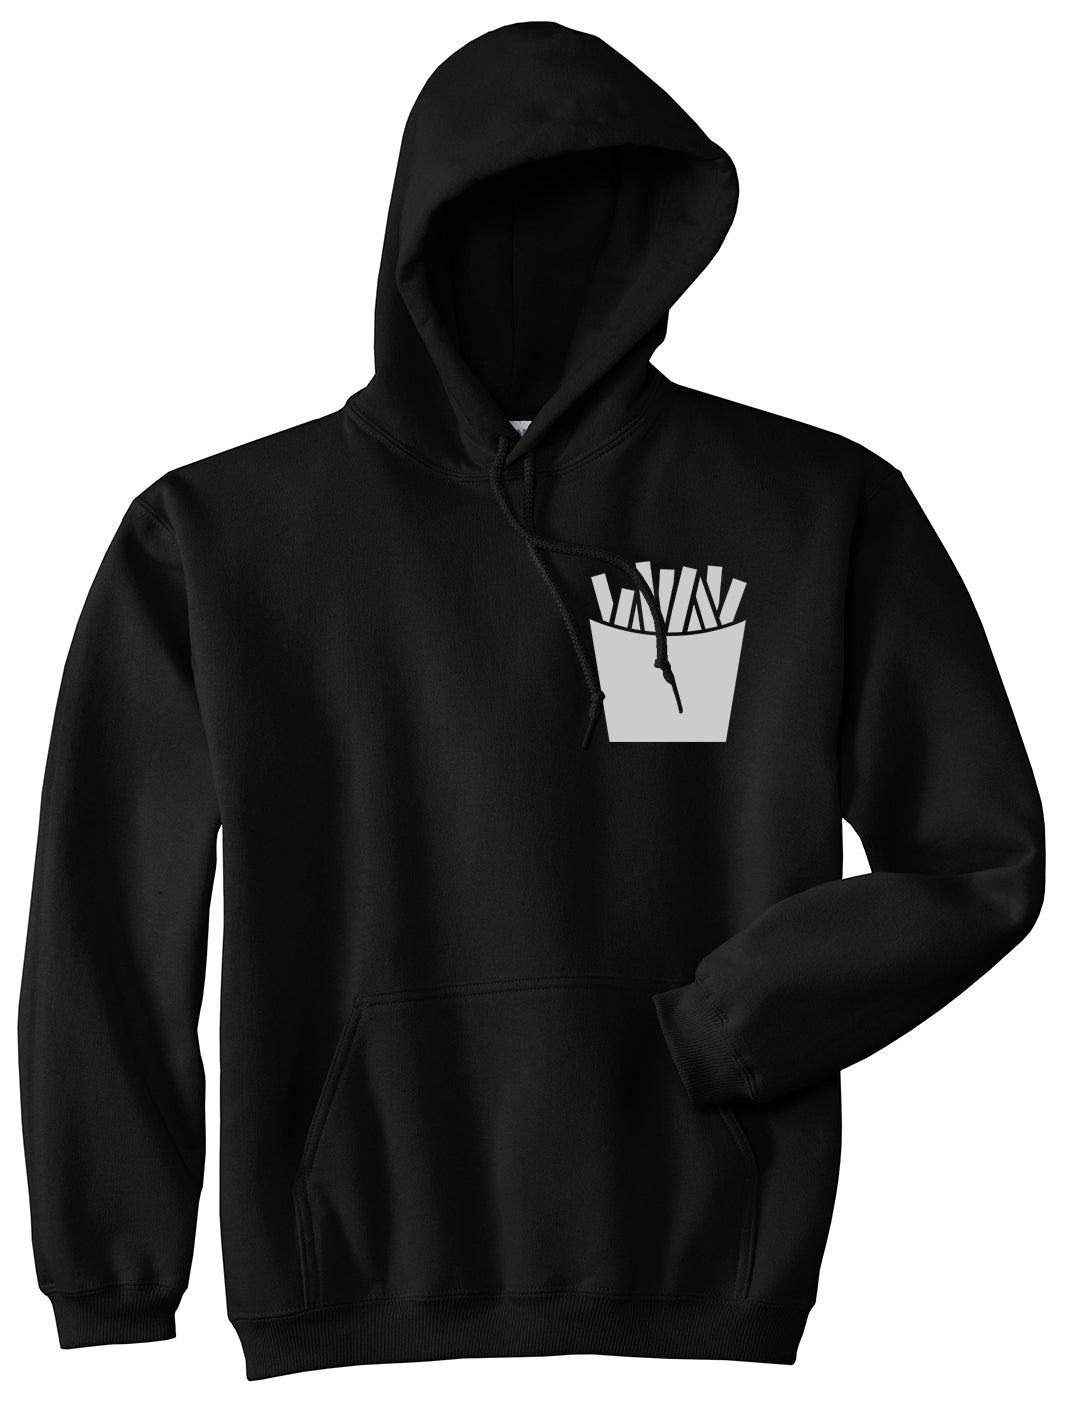 French Fry Fries Chest Mens Black Pullover Hoodie by KINGS OF NY